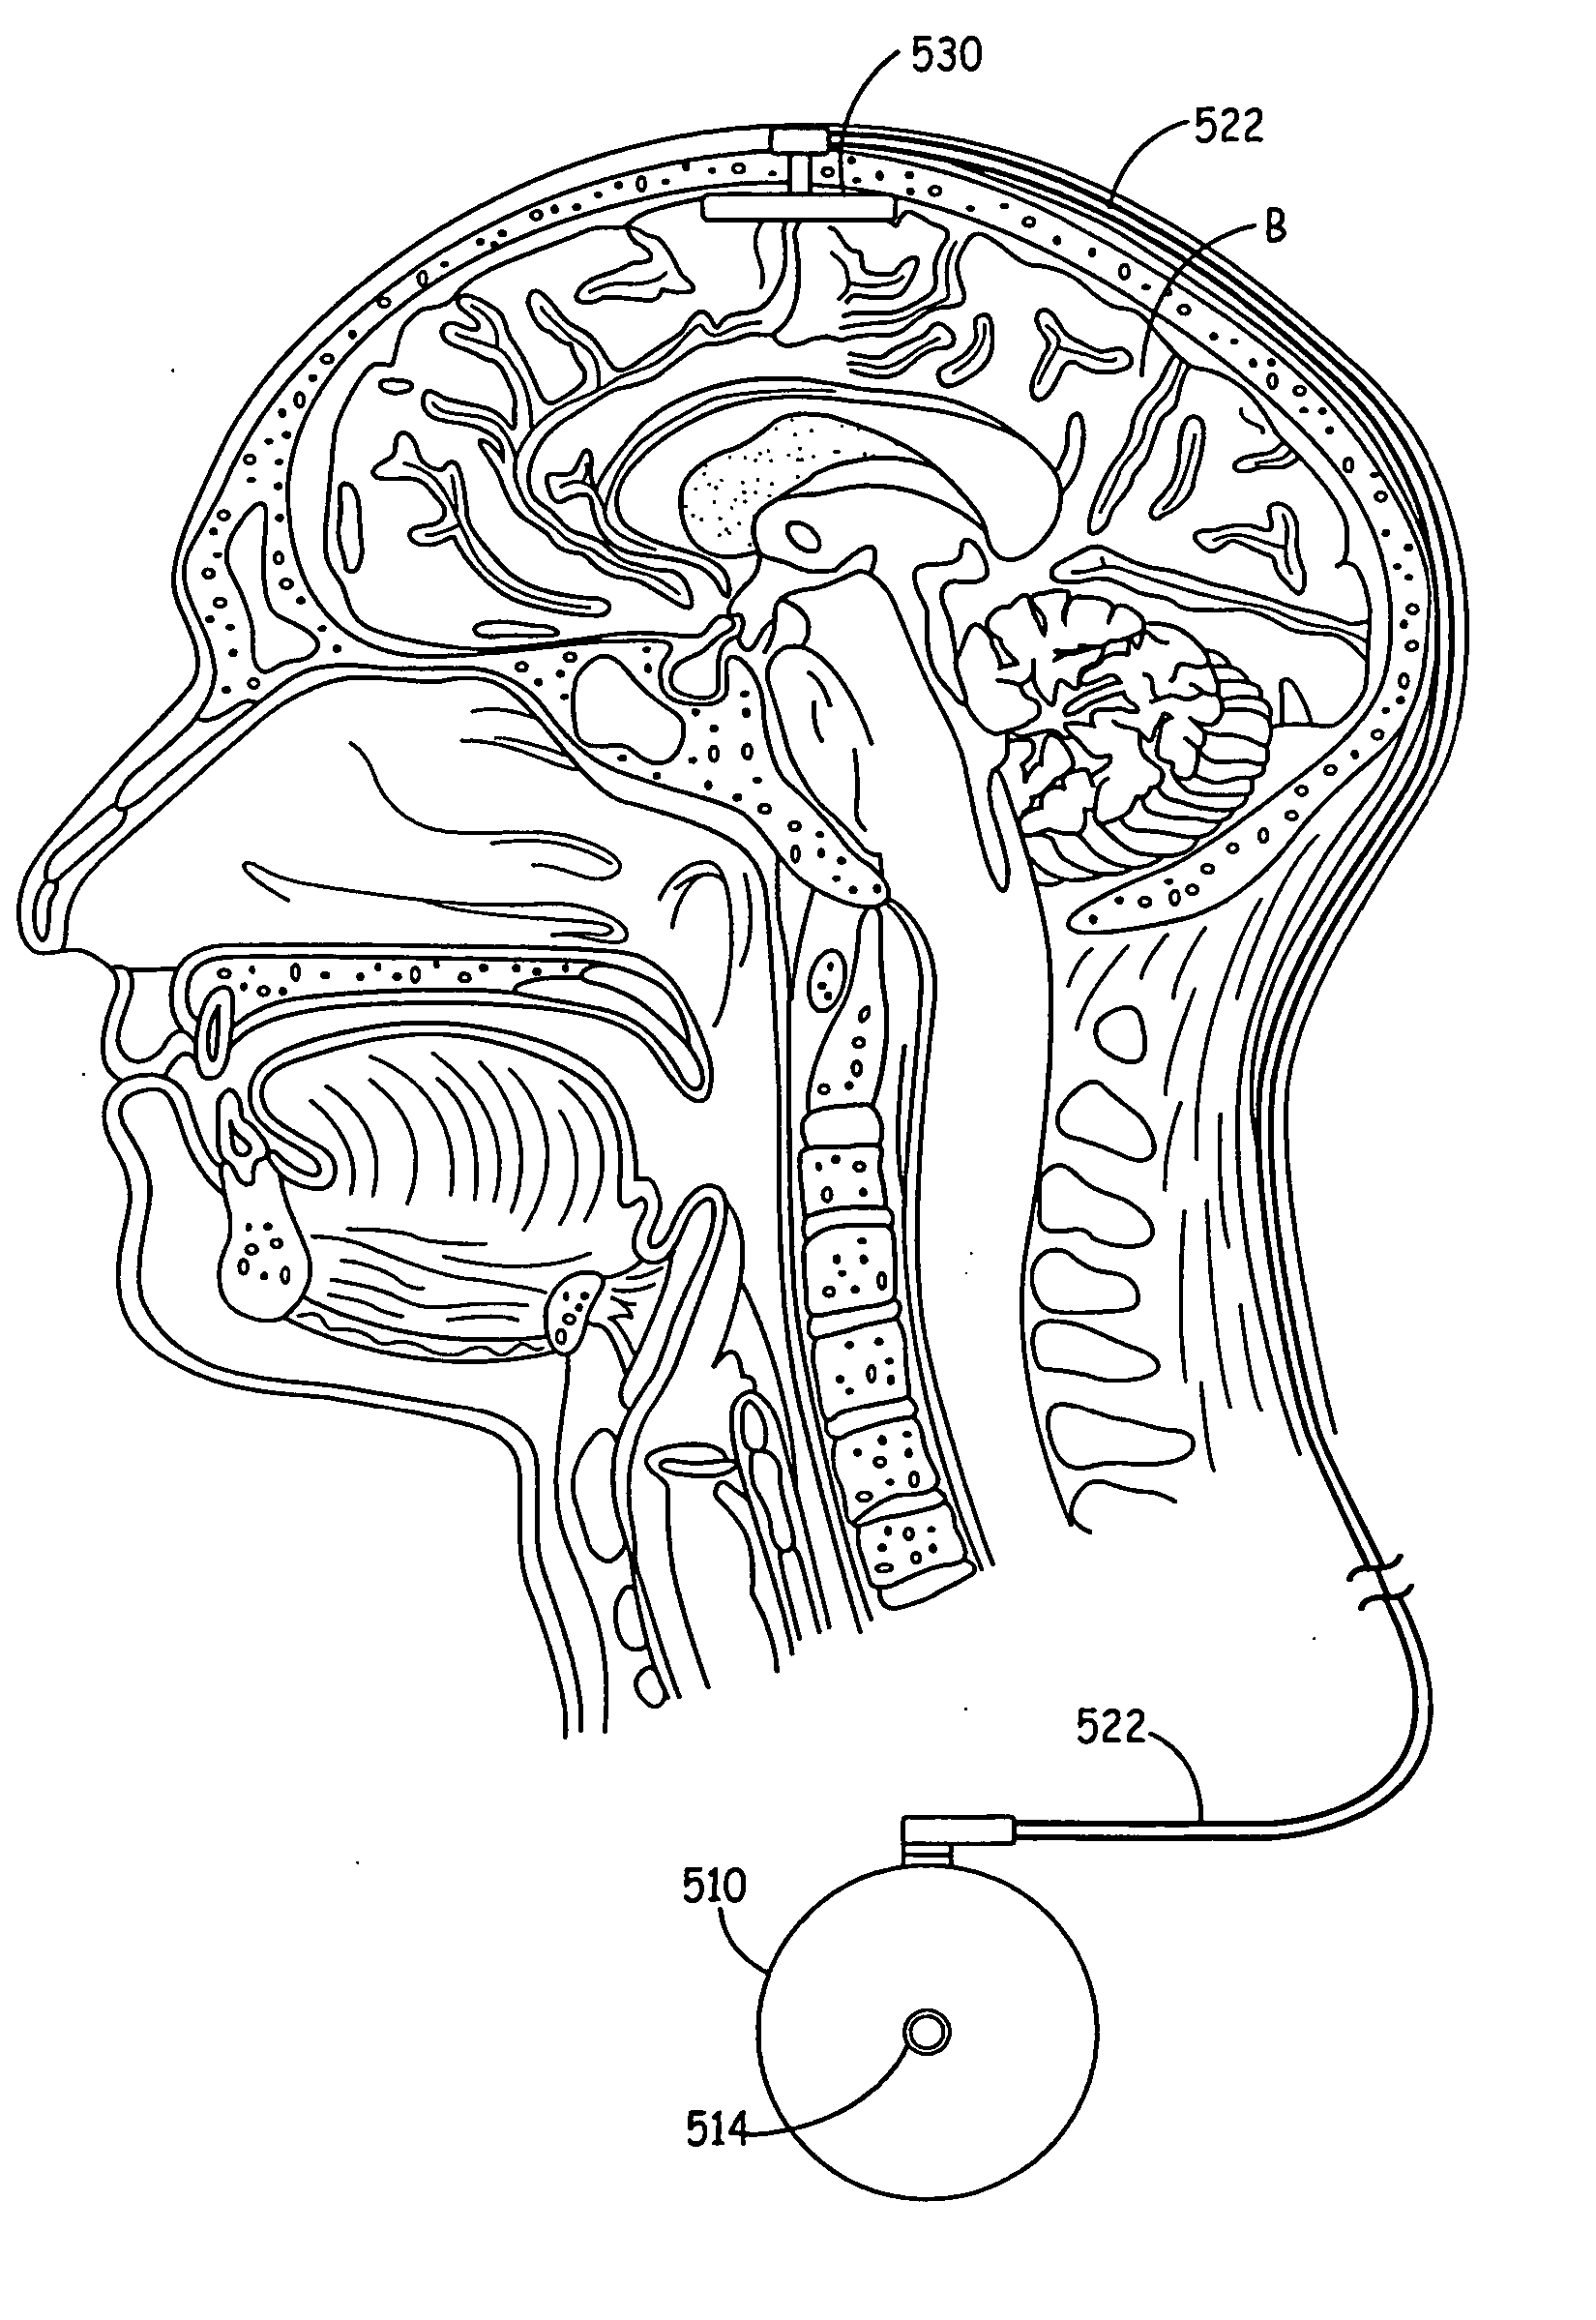 Anchoring of a medical device component adjacent a dura of the brain or spinal cord